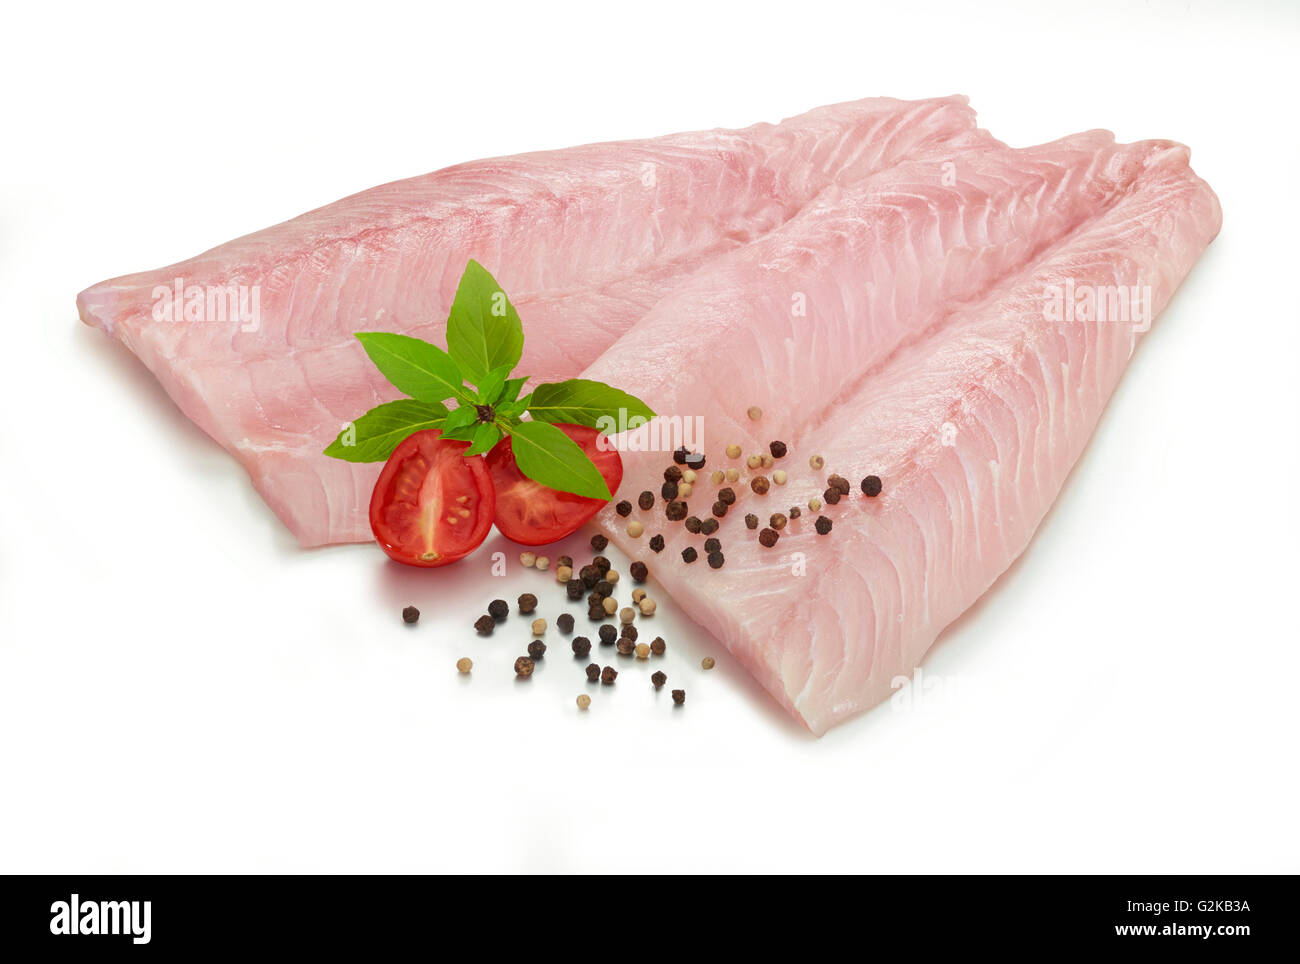 Fillets of Nile perch (Lates niloticus), peppercorns (Piperaceae), tomato (Solanum lycopersicum) and mint (Mentha sp.) Stock Photo